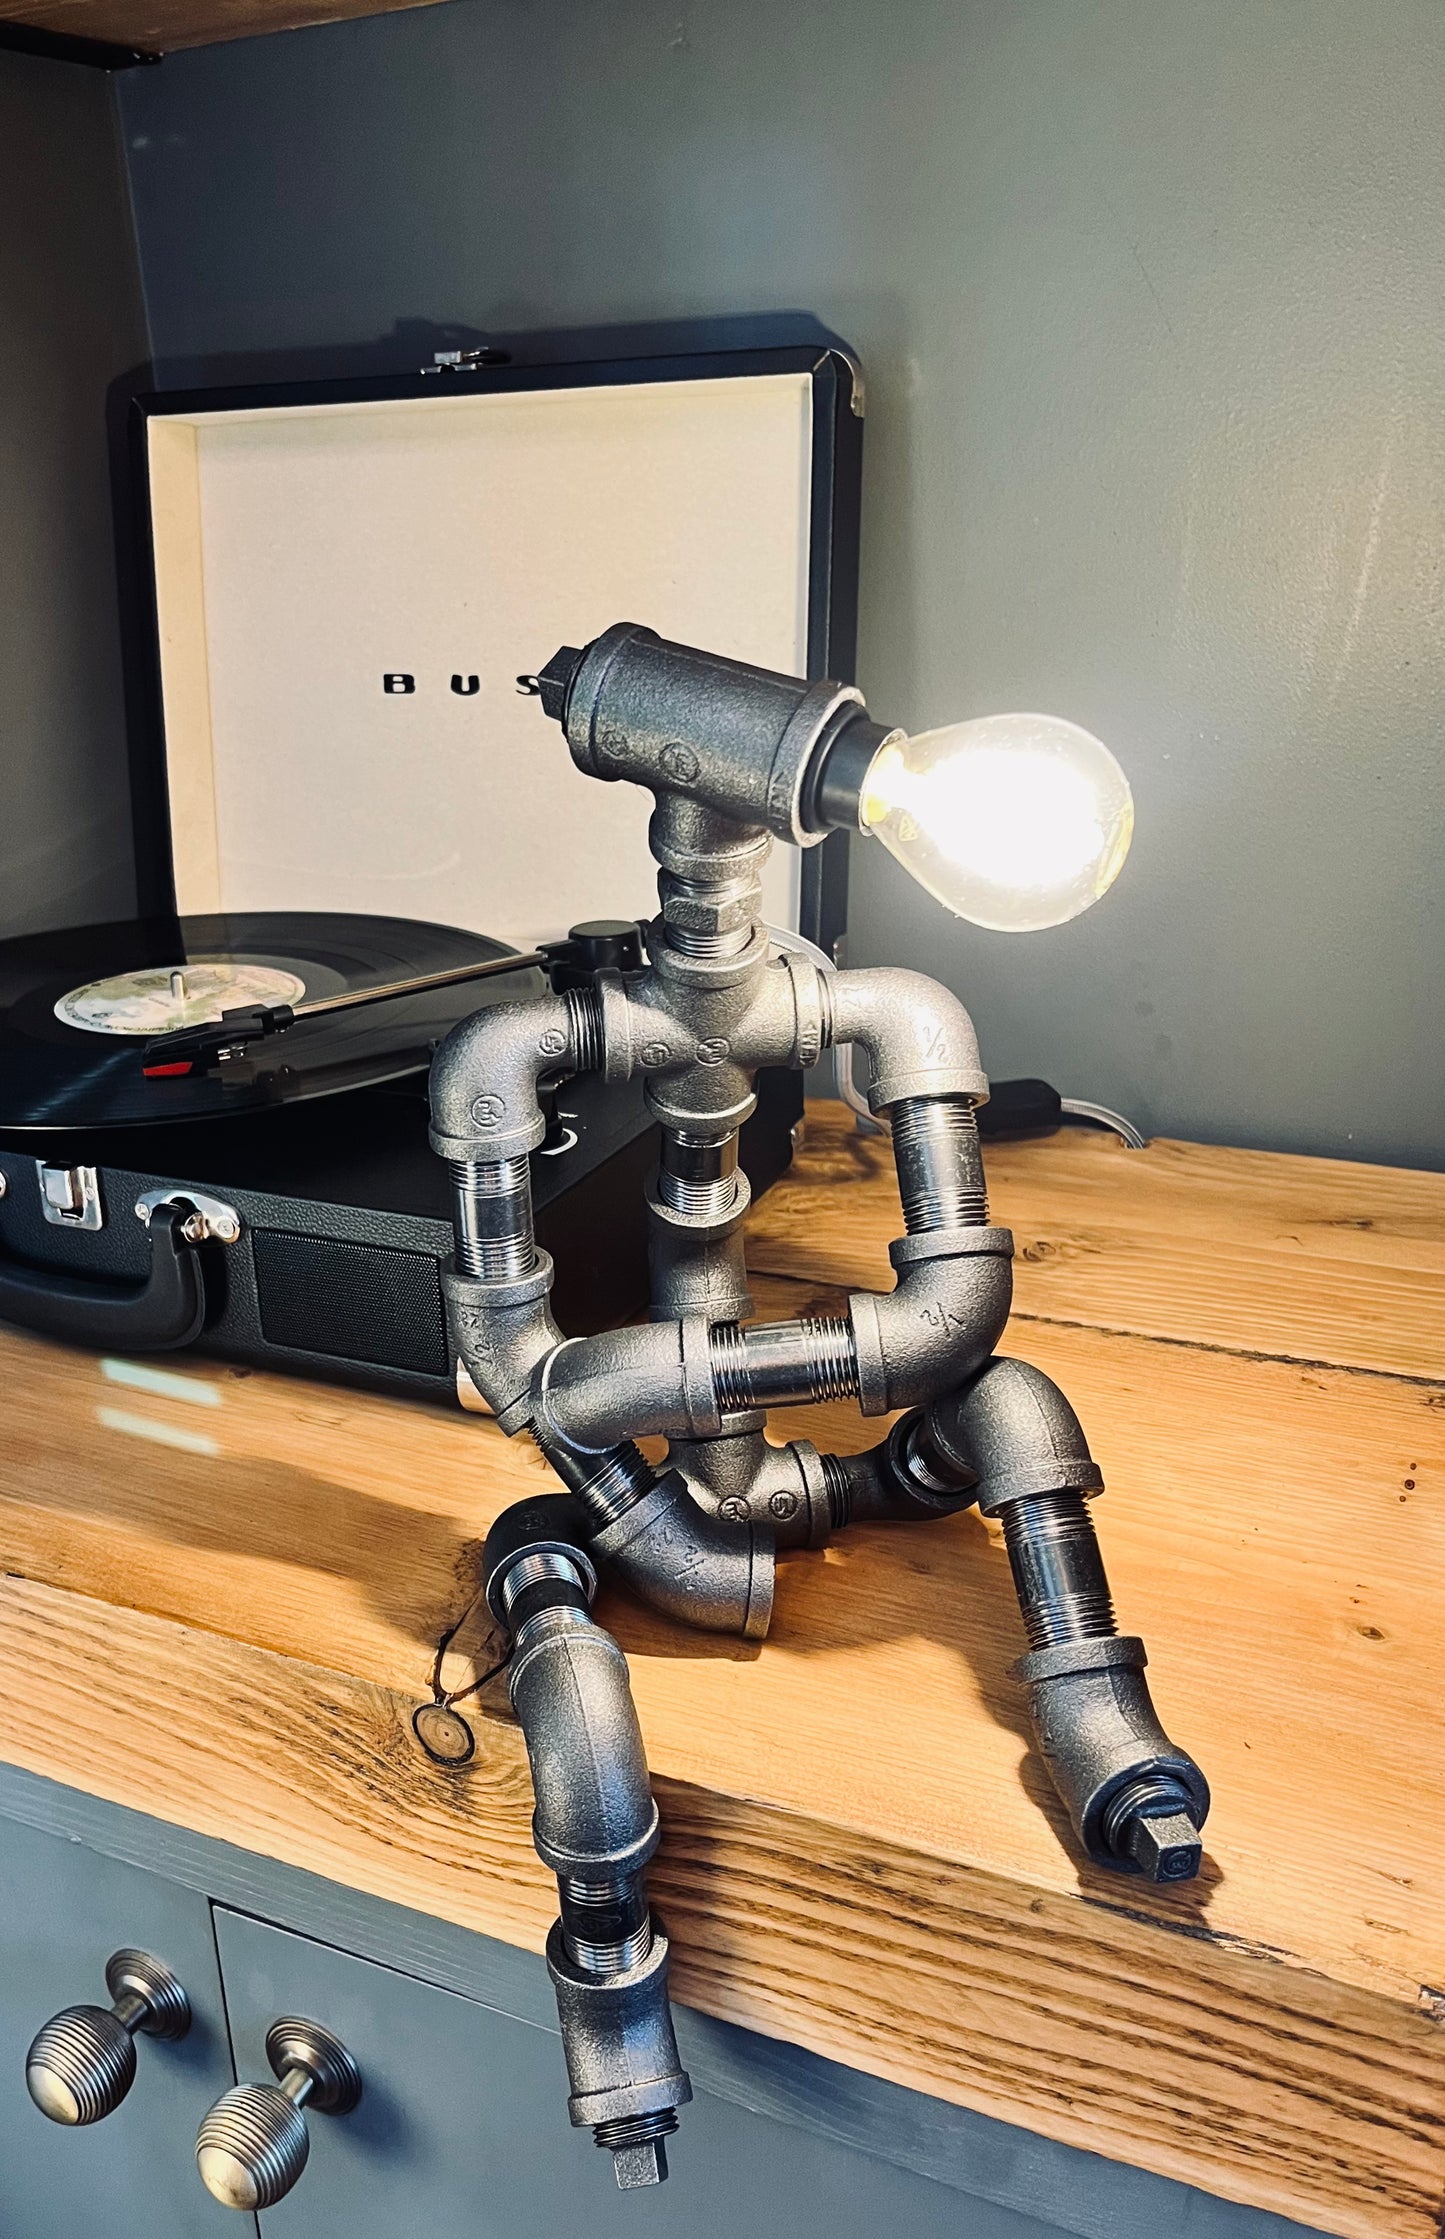 The Companion Industrial Iron Pipe Person Robot Lamp & Modern White Bulb